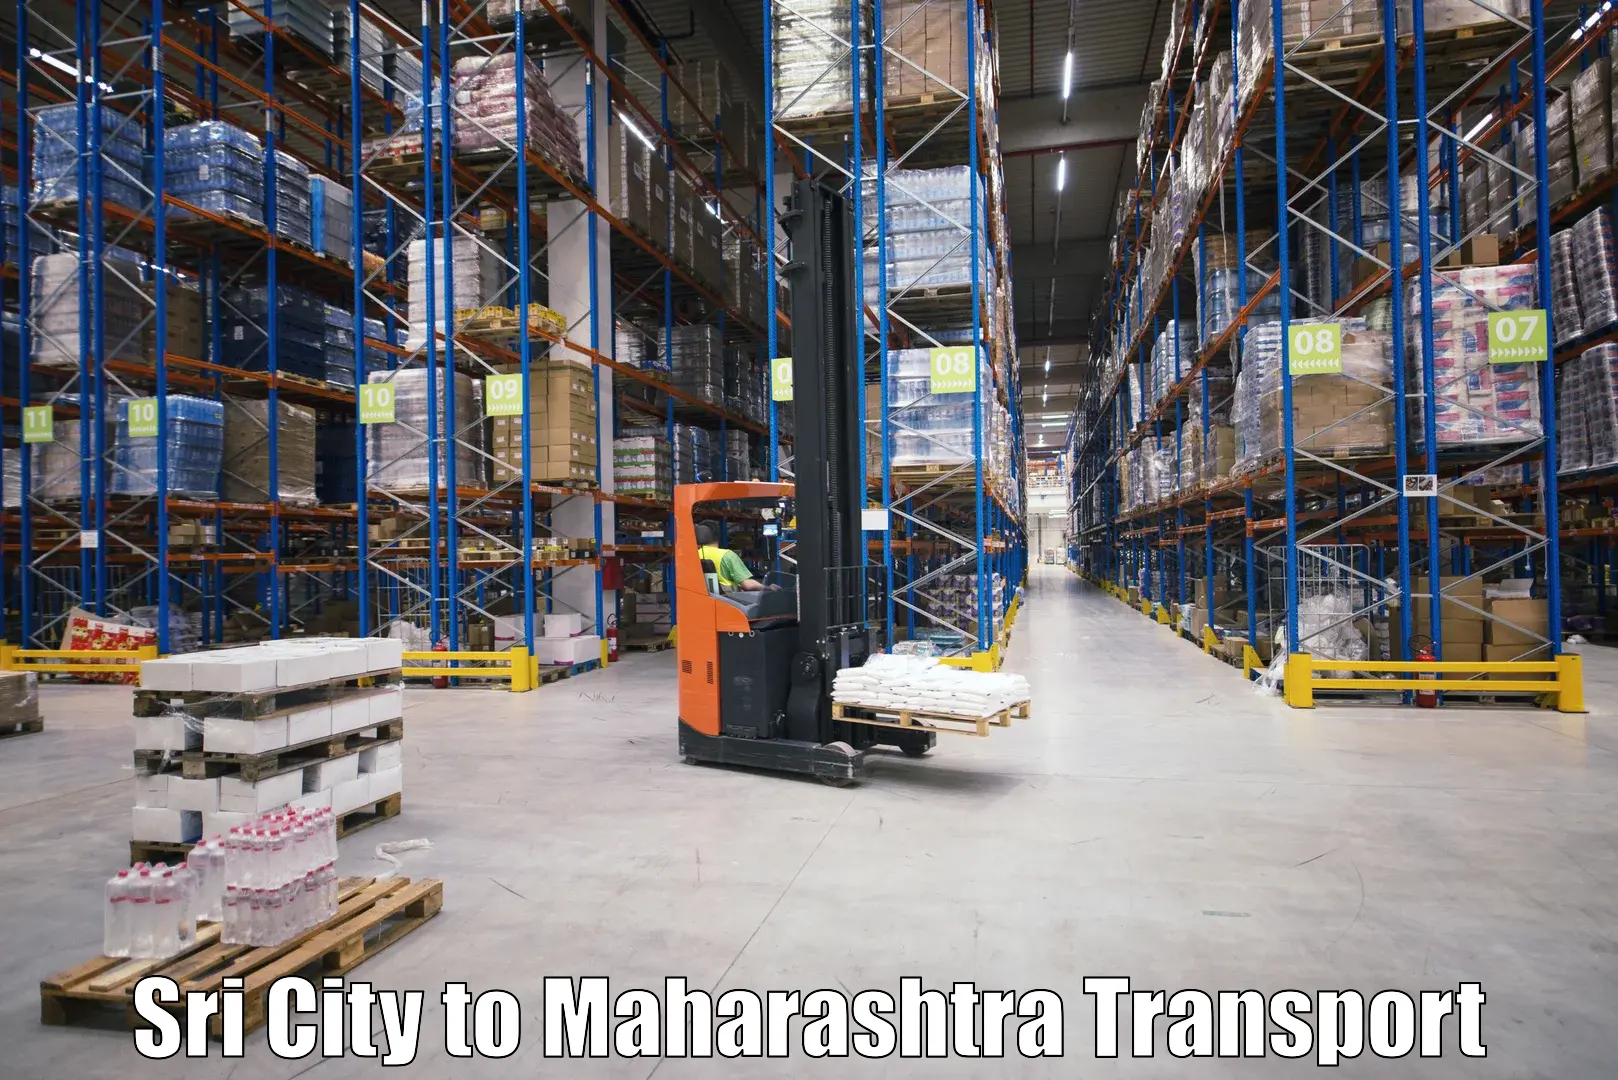 Goods transport services in Sri City to Alephata